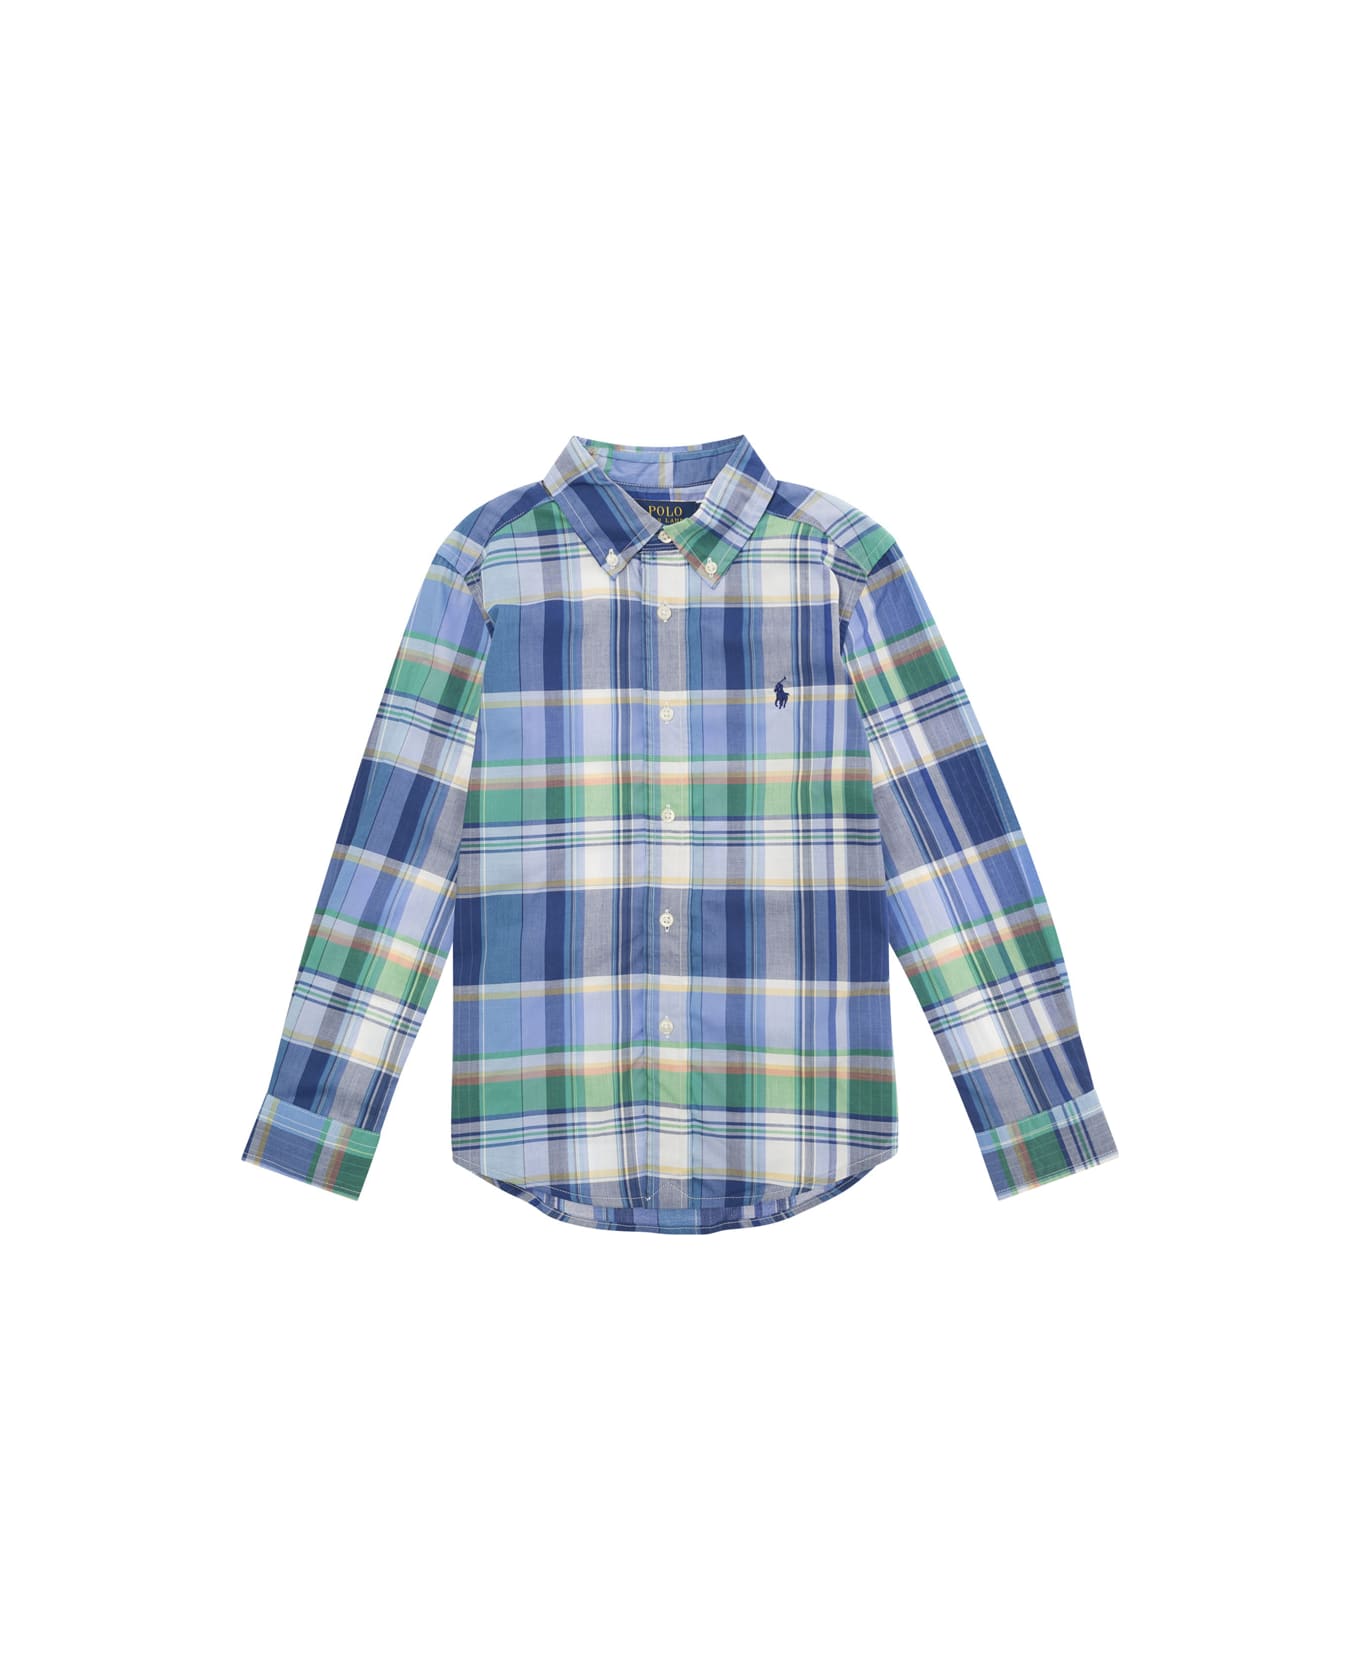 Polo Ralph Lauren White/blue/green All-over Checkered Pattern Shirt In Cotton Boy - Multicolor